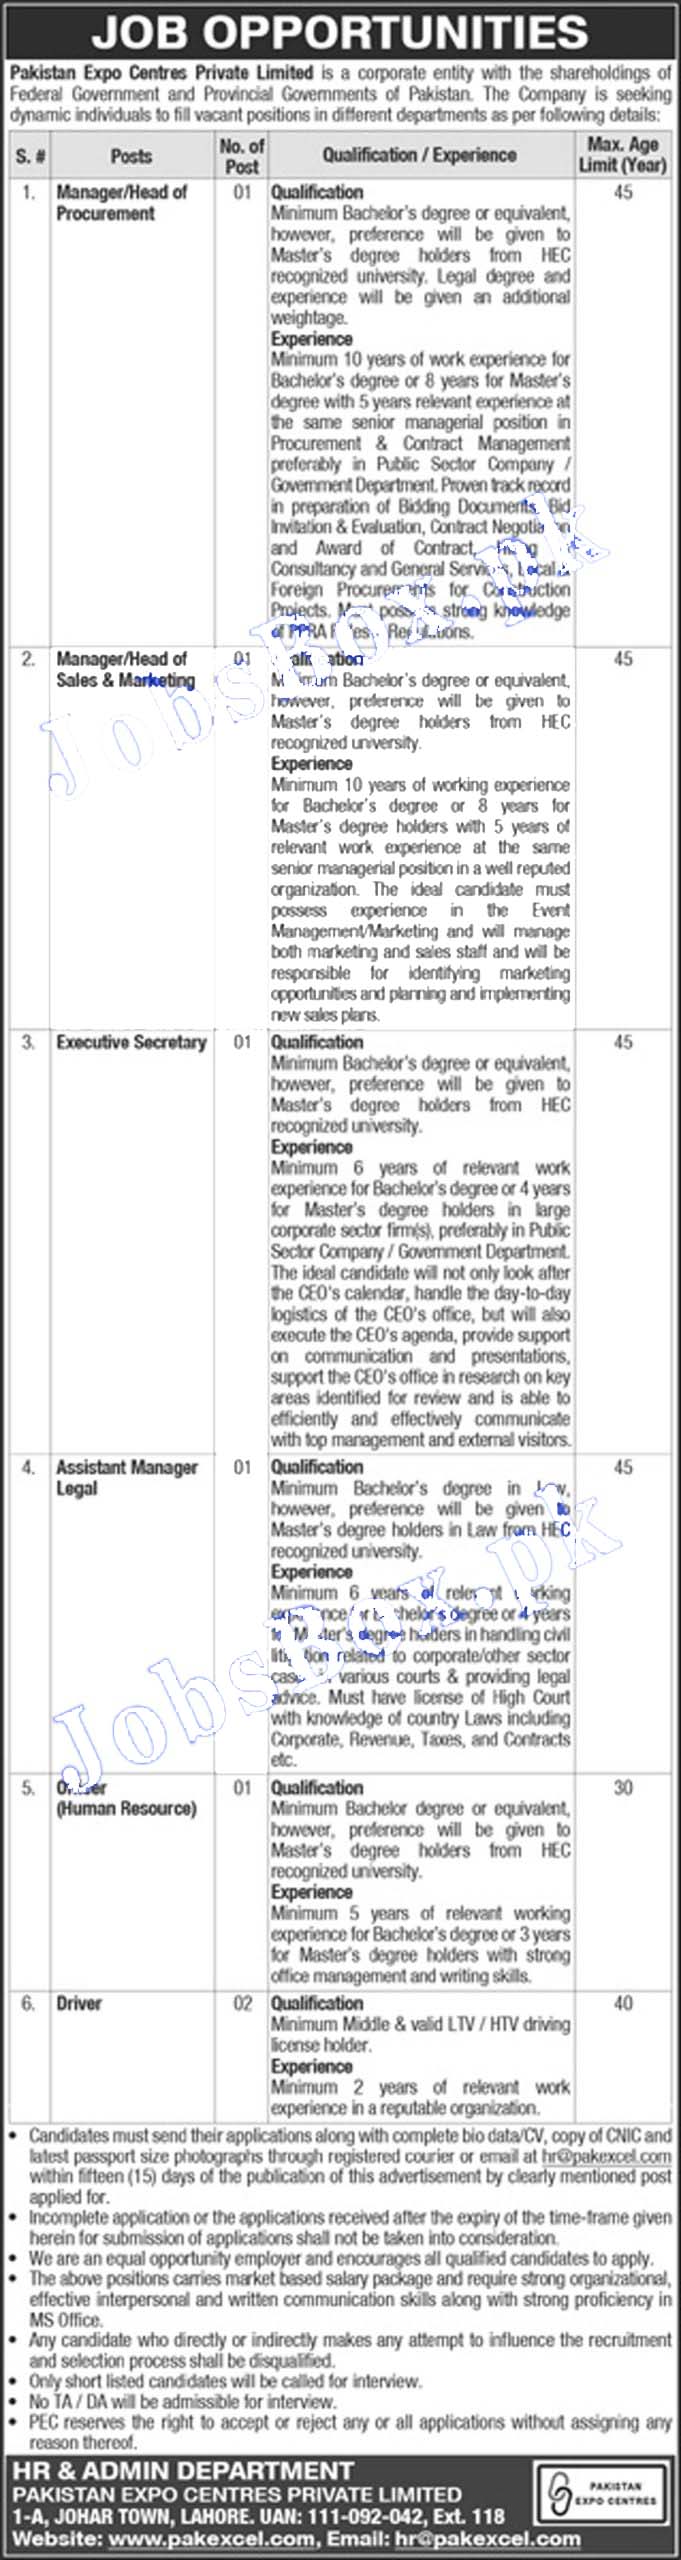 job in Pakistan Expo Centres Private Limited Jobs 2022 latest advertisment